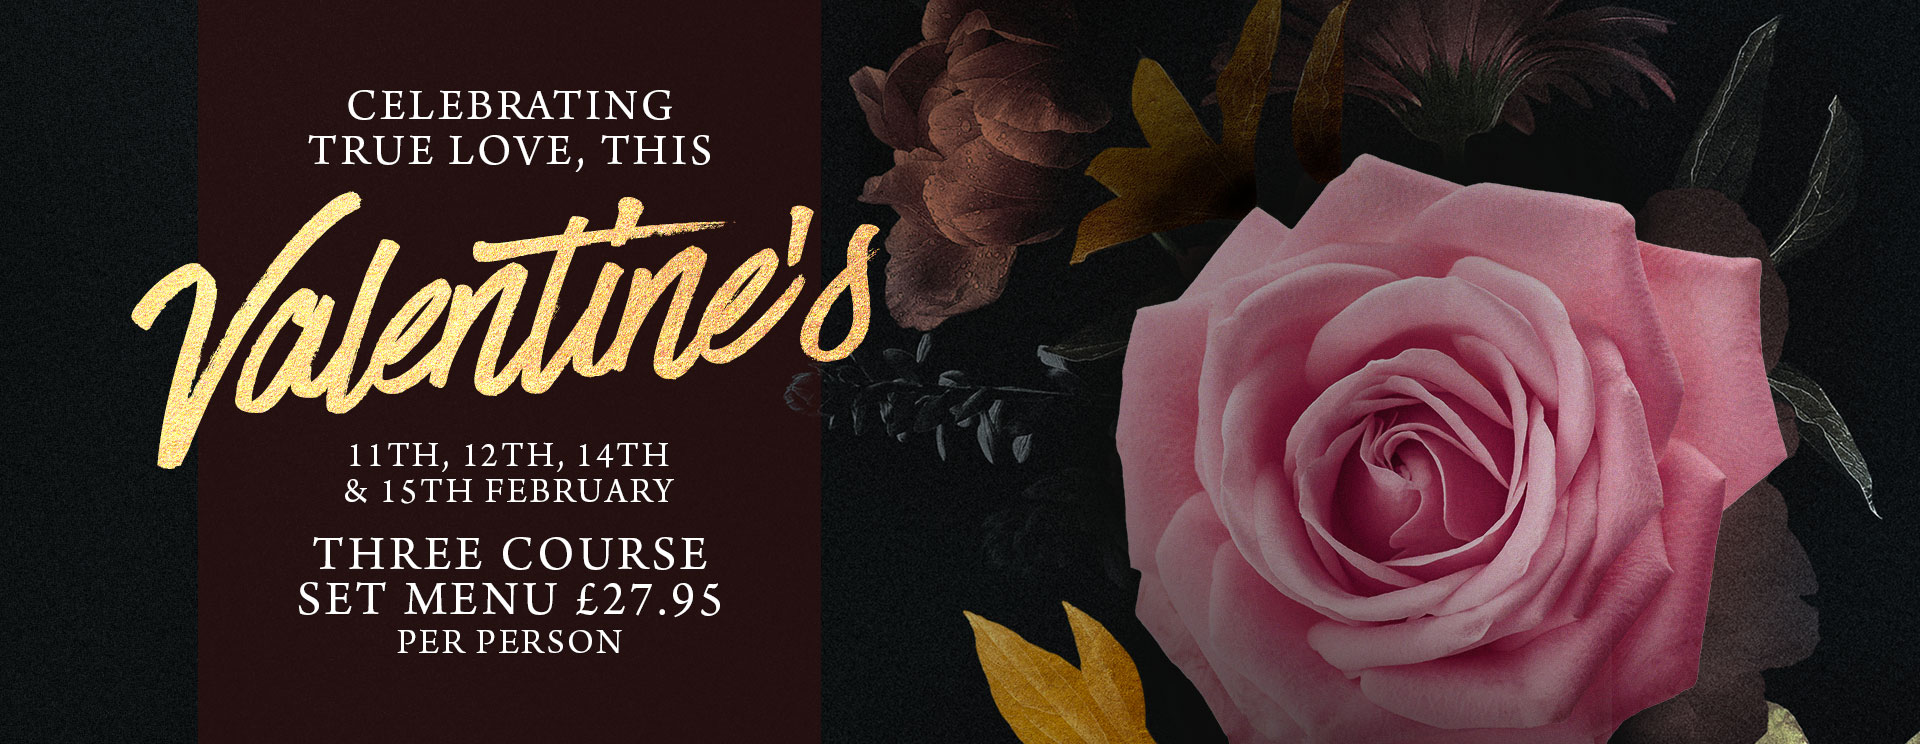 Valentines at The Salisbury Arms